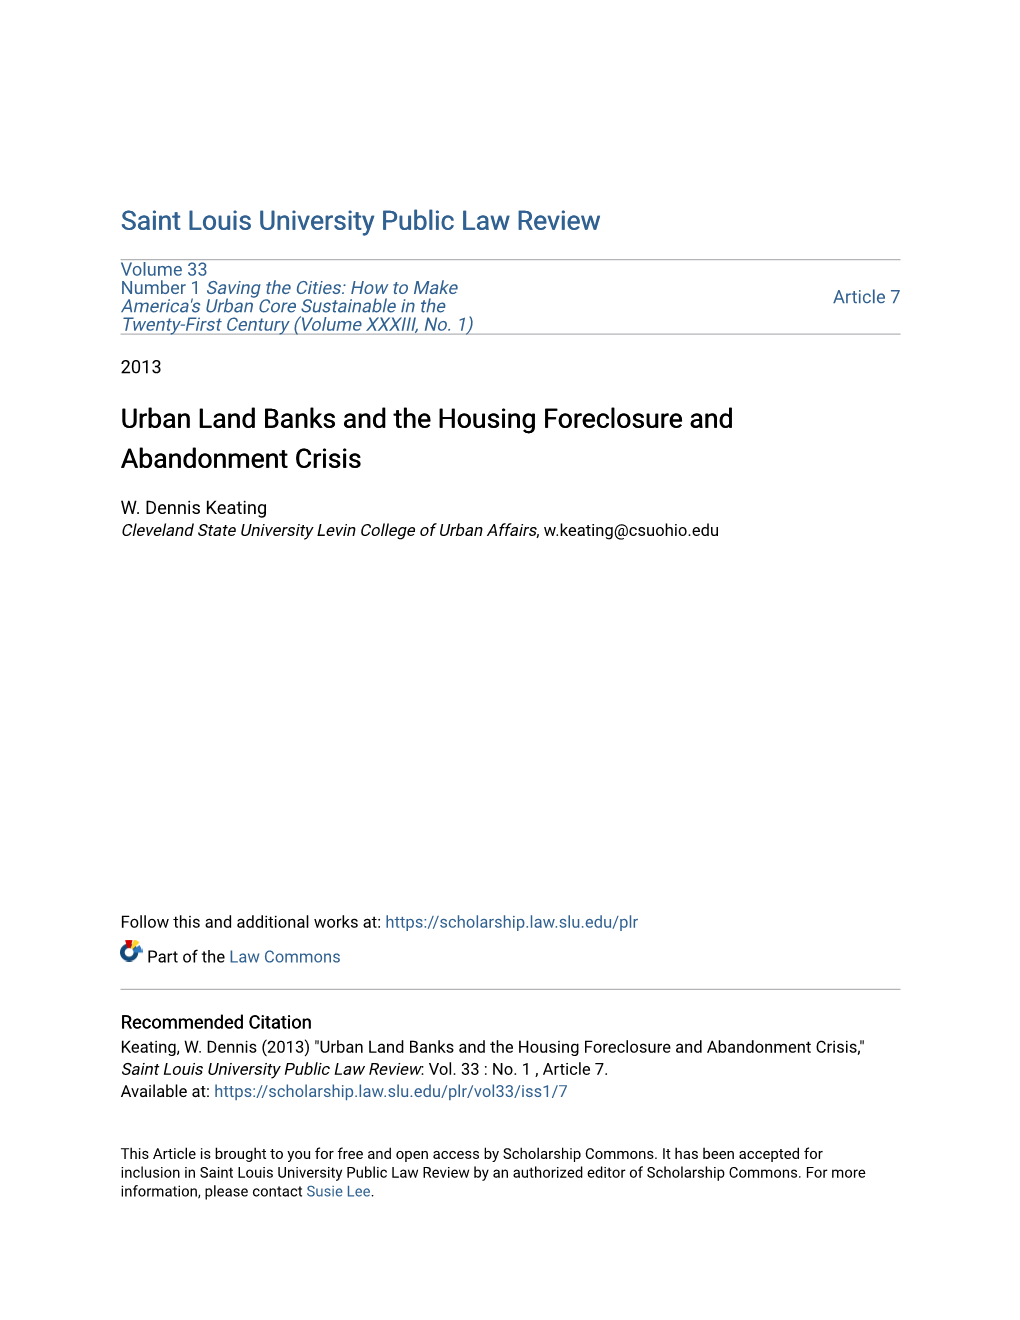 Urban Land Banks and the Housing Foreclosure and Abandonment Crisis